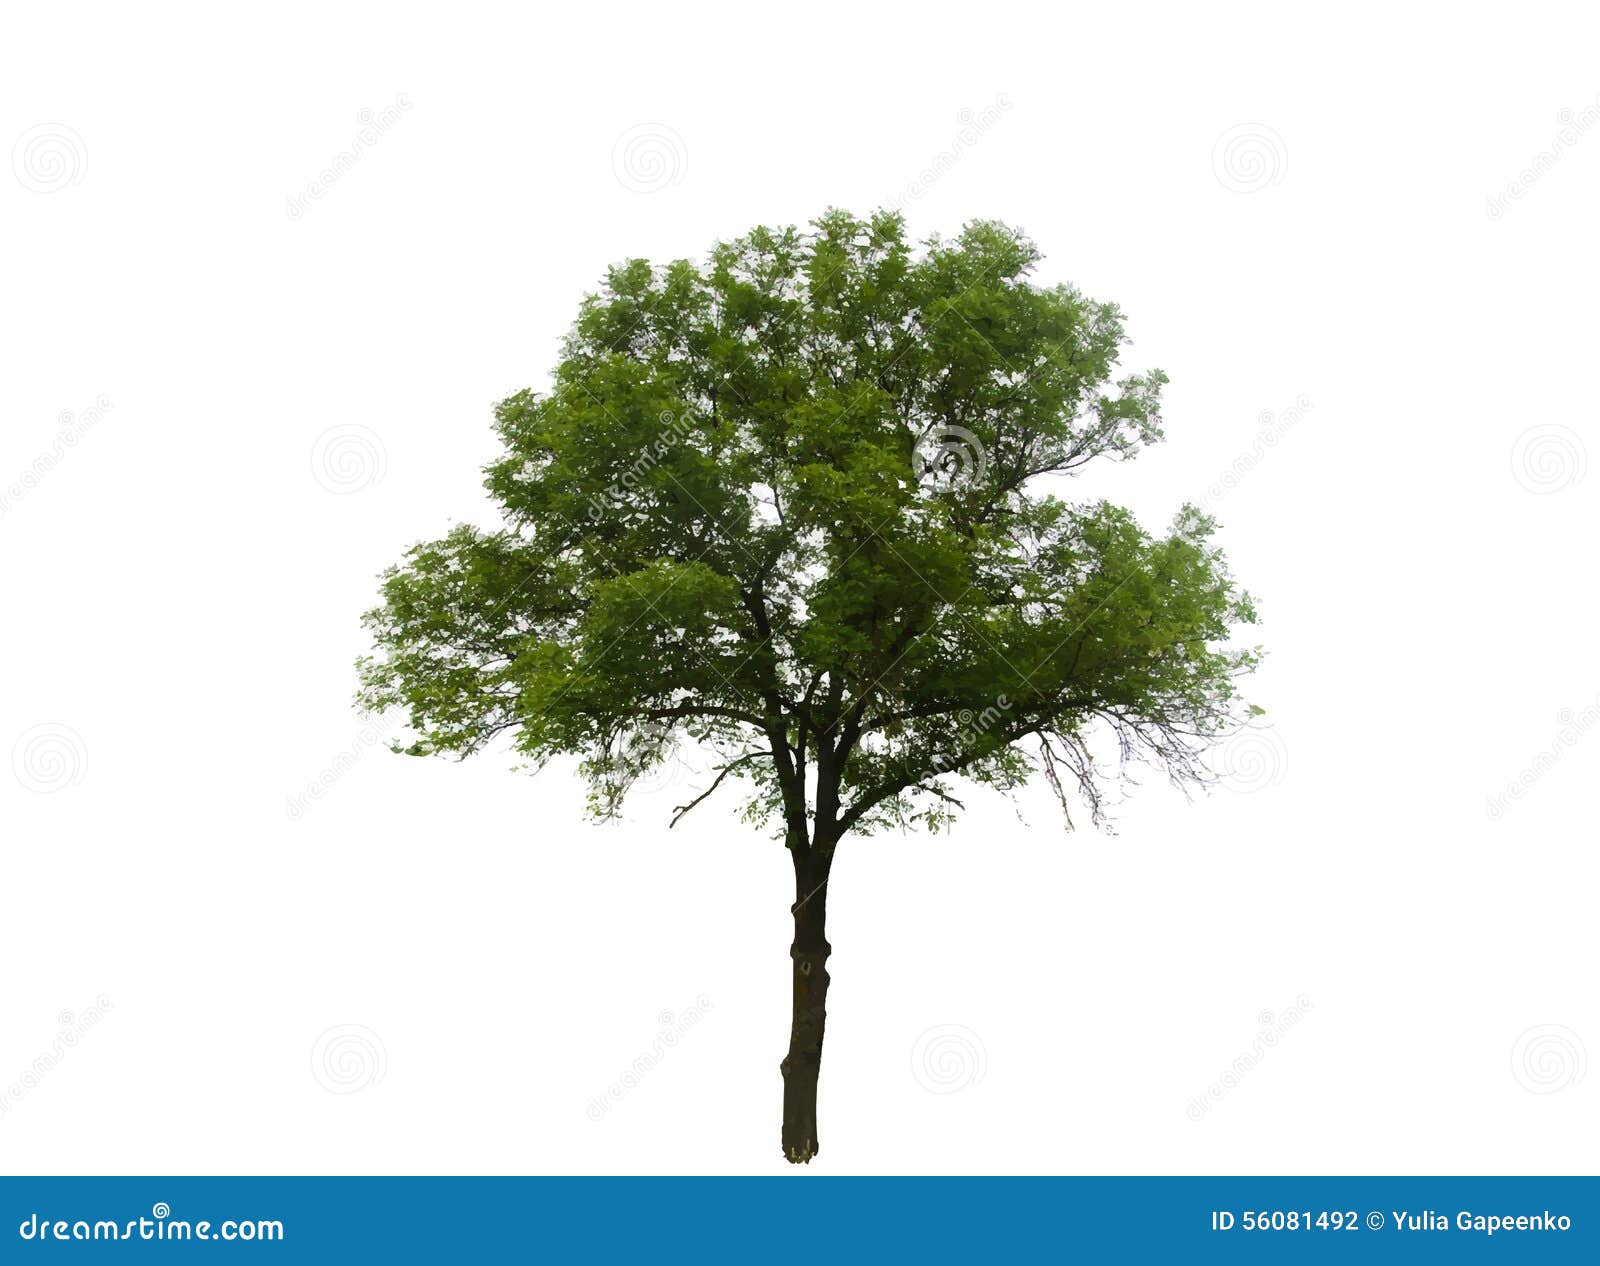 Colored Silhouette Tree Isolated on White Backgorund. Vector Illustration. EPS10